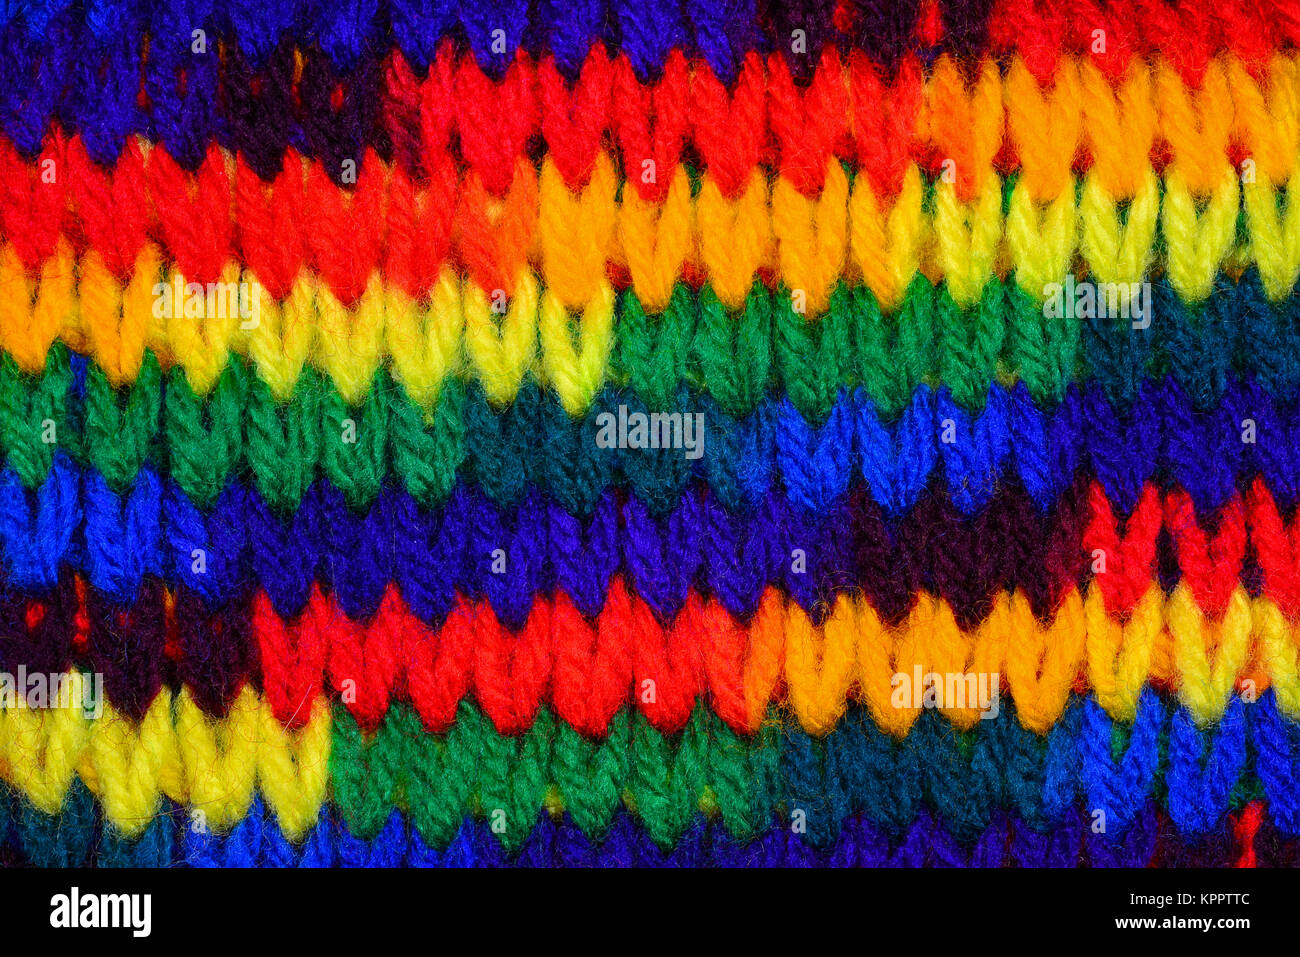 Bold bright primary colorful knitting stitch background. Stock Photo